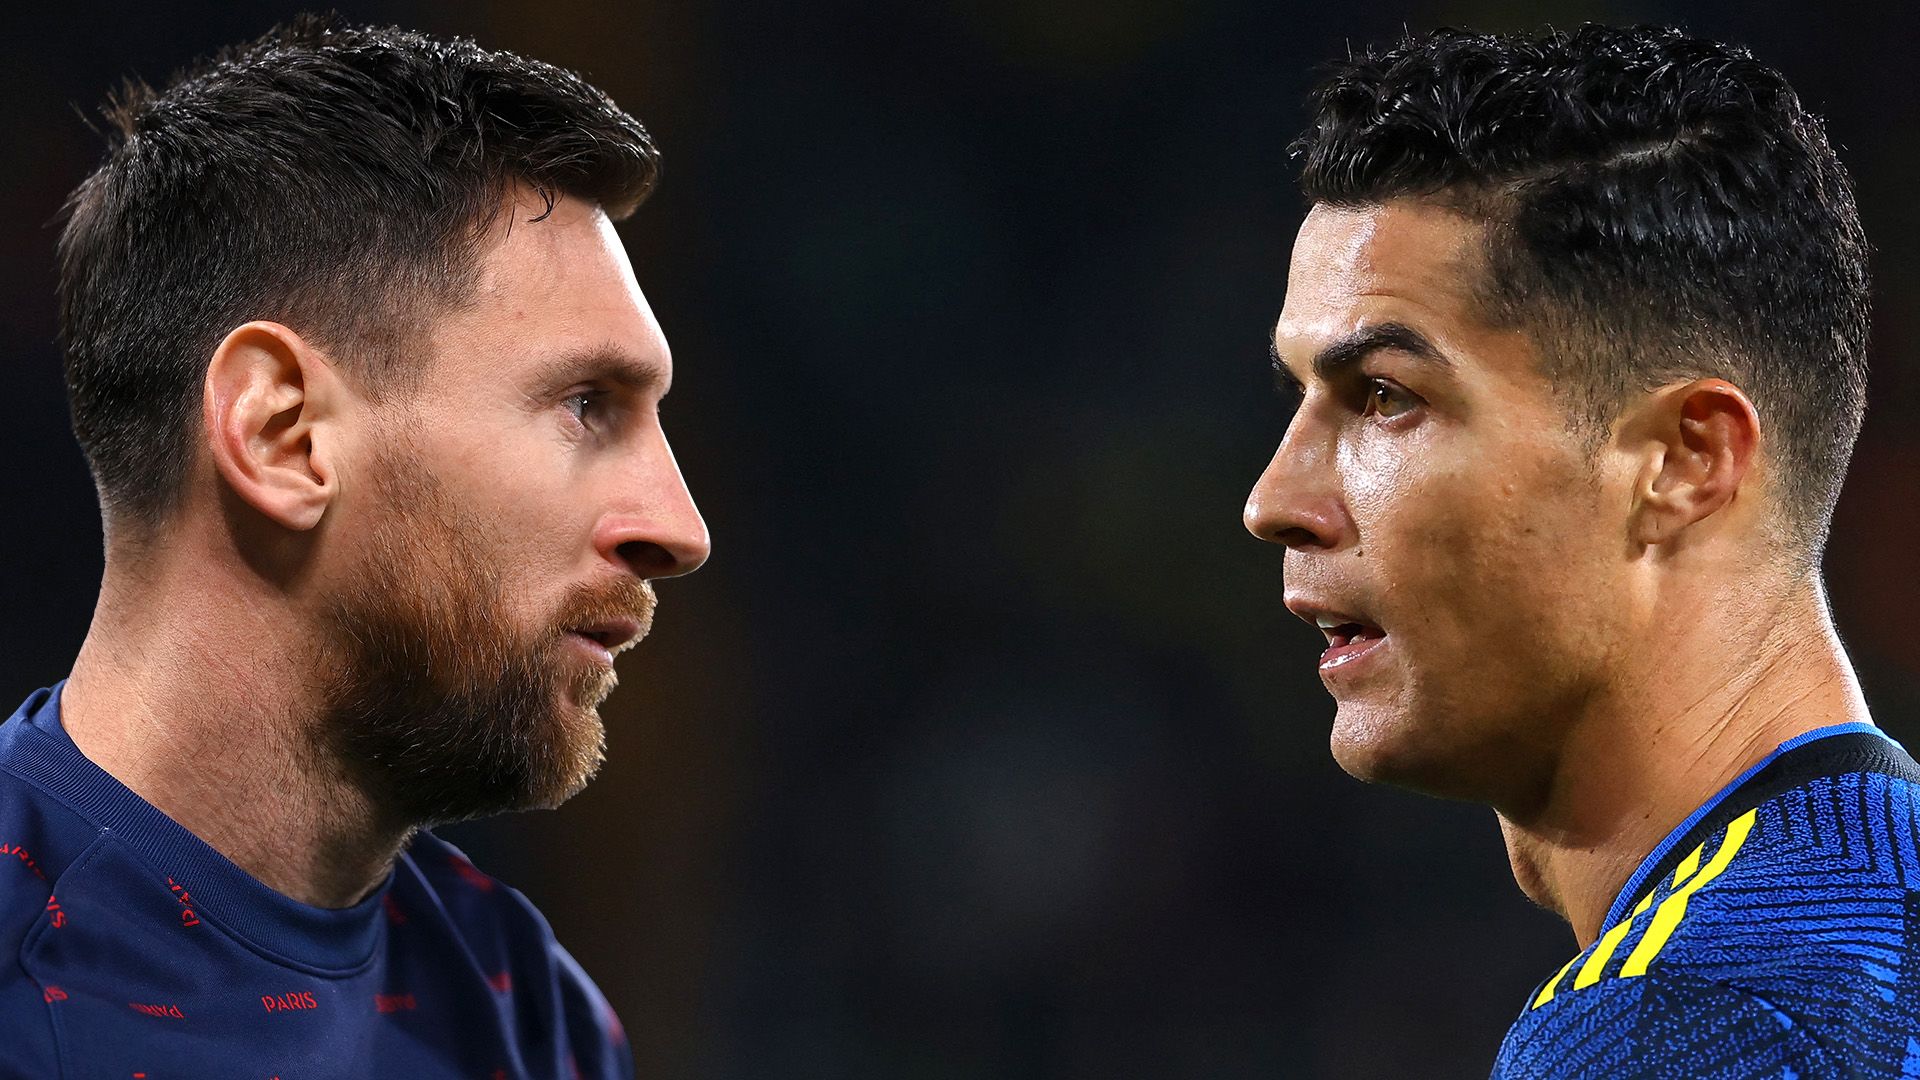 You Thought The Excruciating Messi-Ronaldo Rivalry Was Over? Here's Some Sensational Sneak-Peek Gossip We Have Heard!